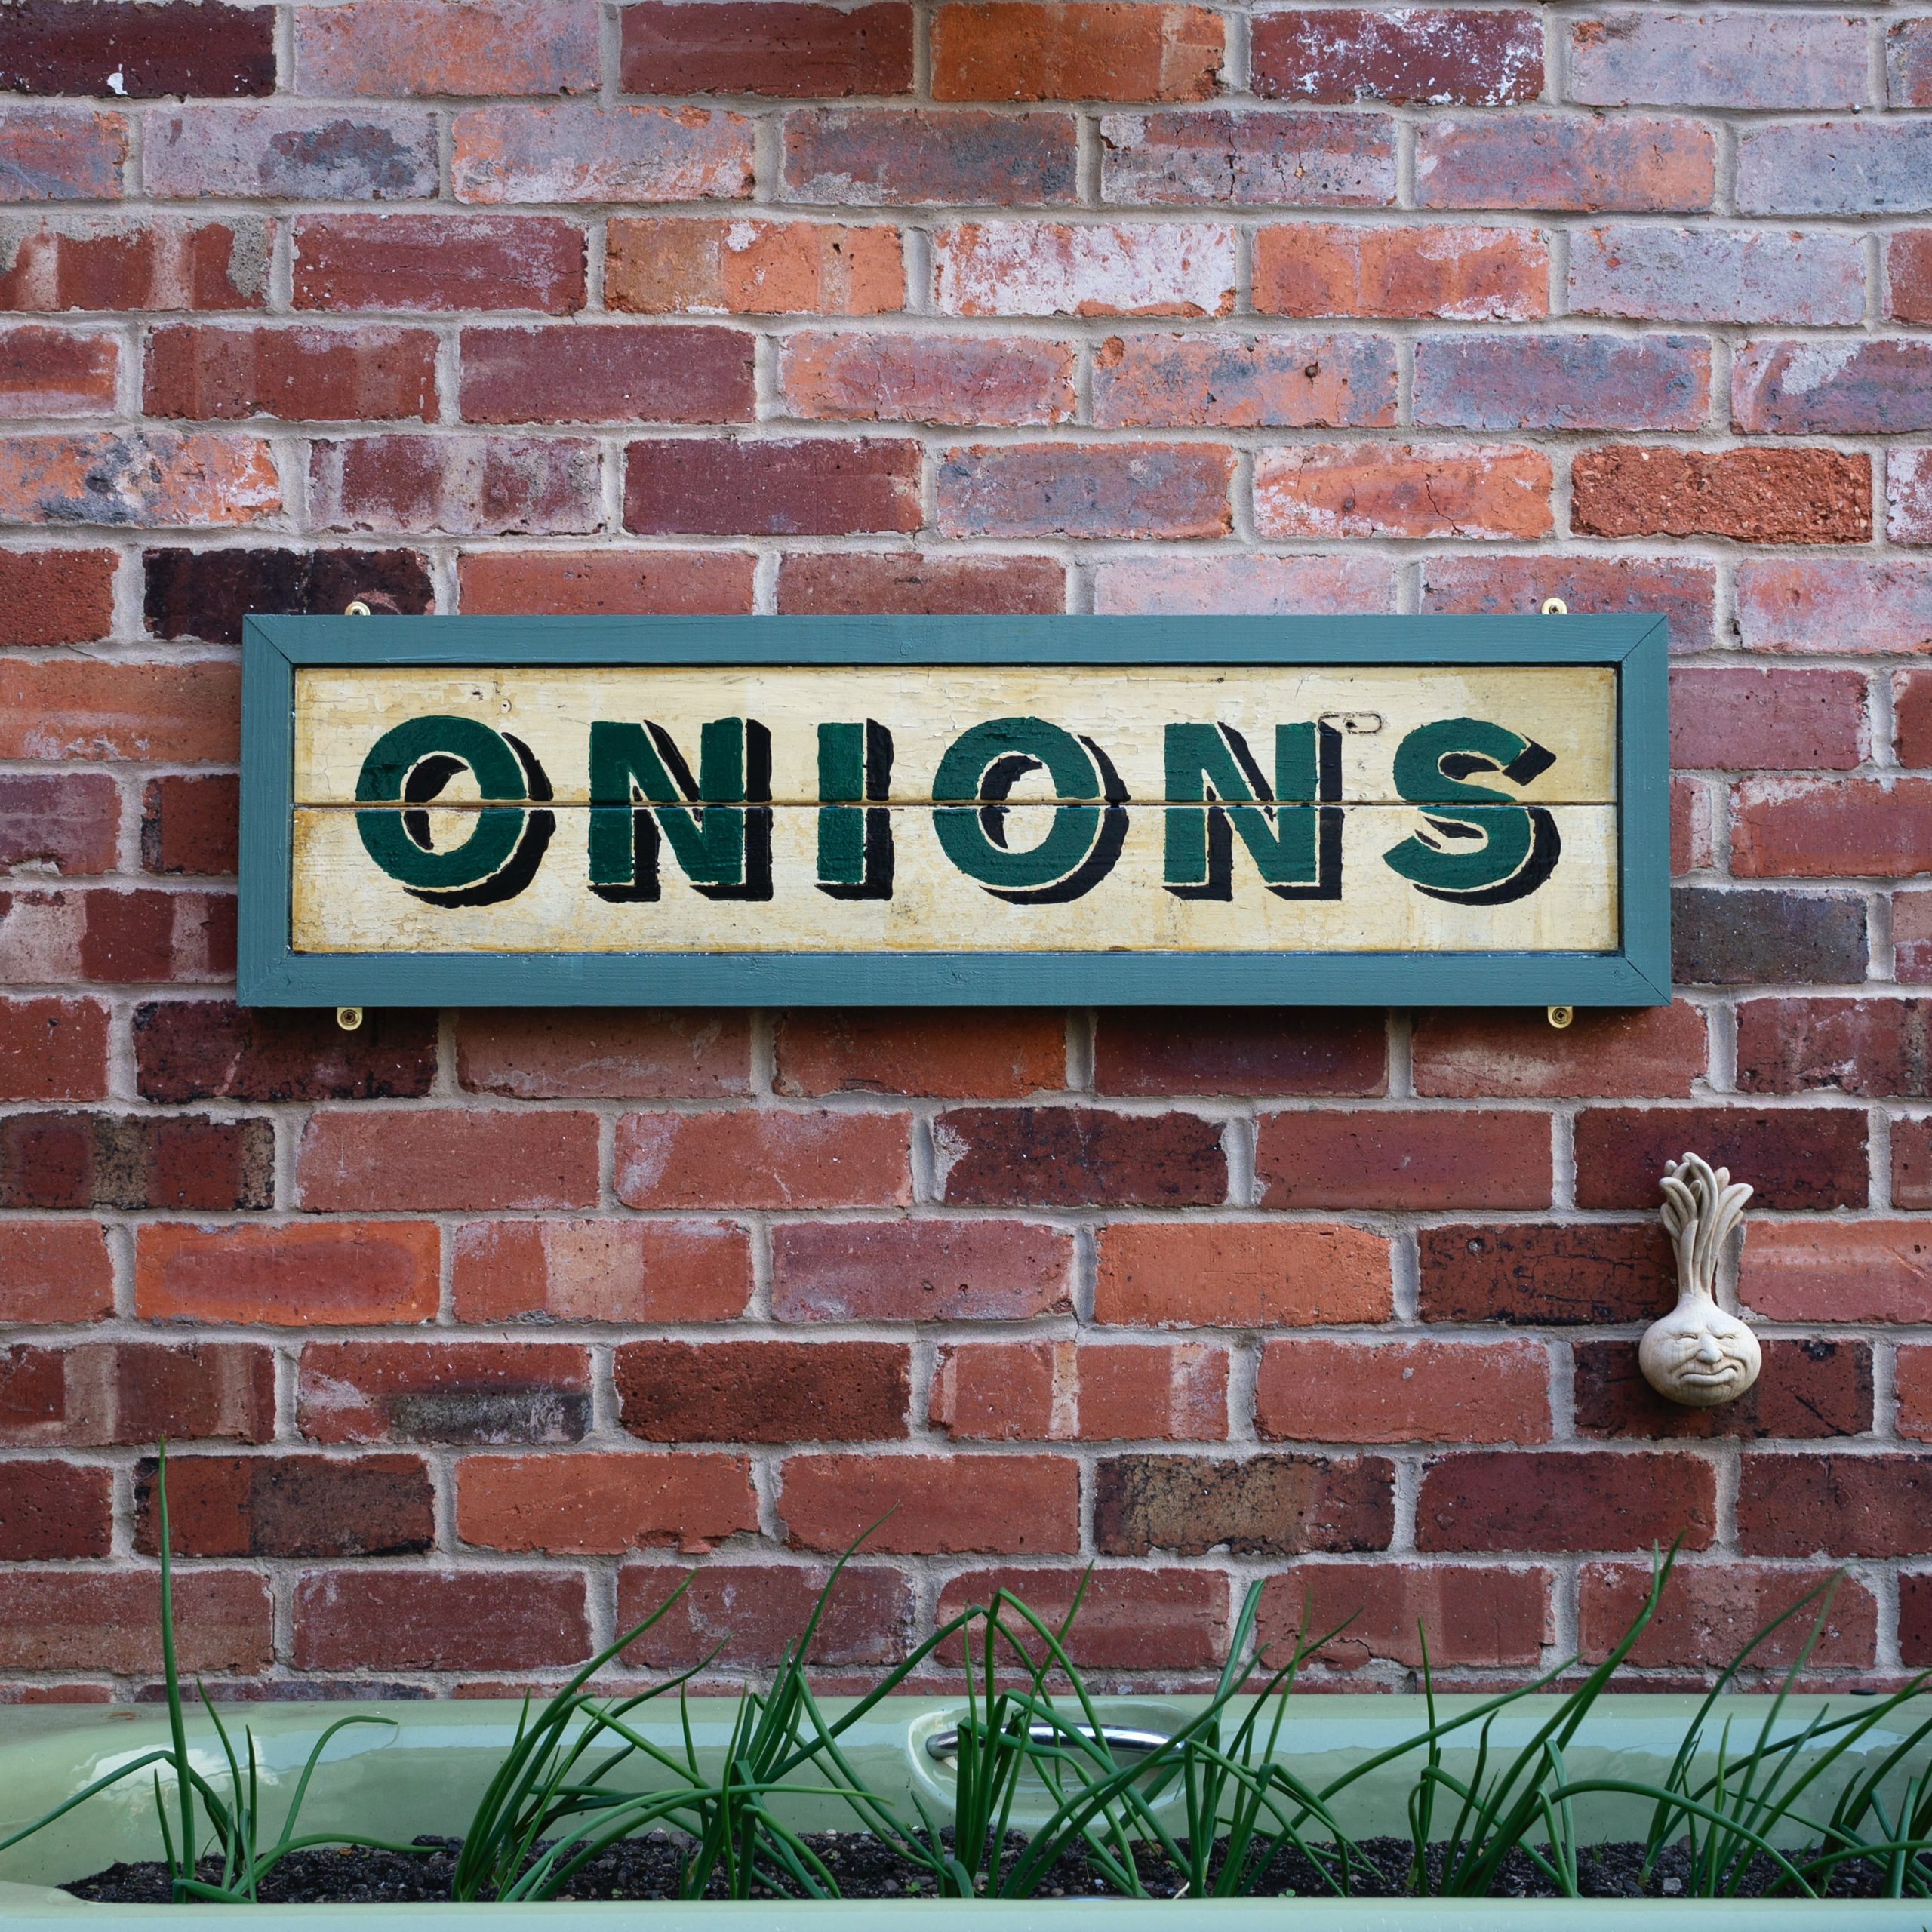 How Many Varieties Of Onions Are There?